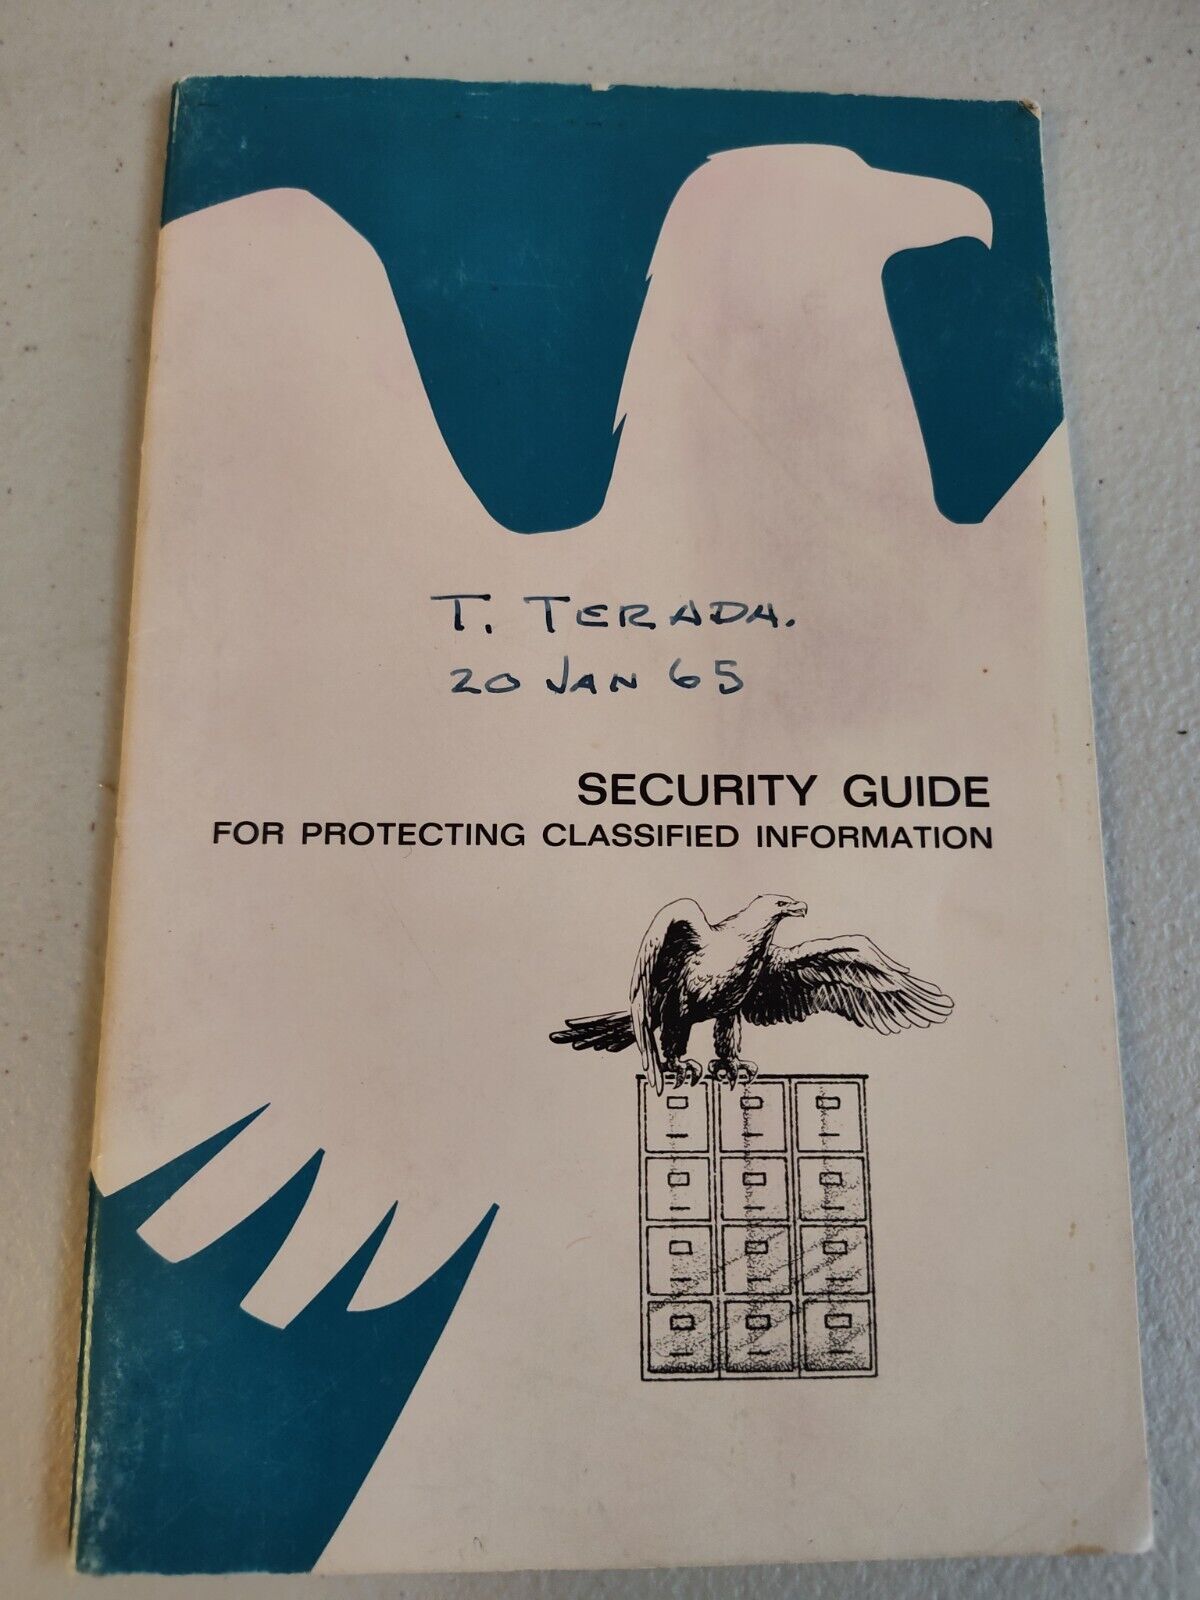 Boeing Aircraft Company, Vertol Division security guide booklet, circa 1965